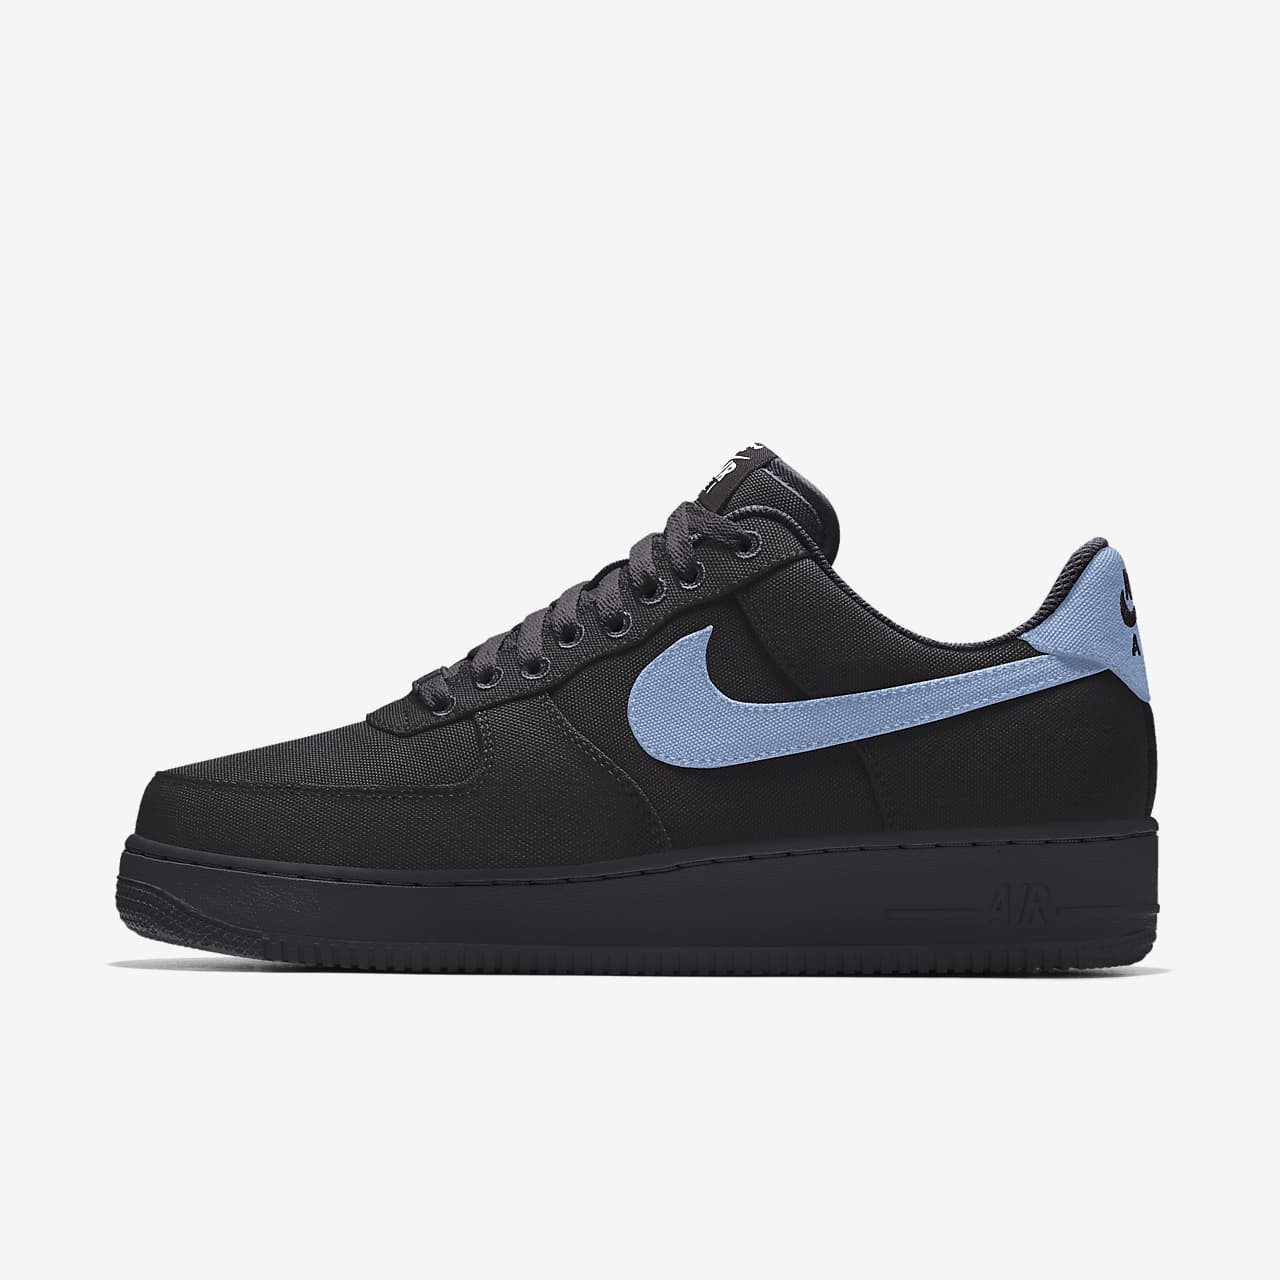 Nike Air Force 1 Low By You personalizables - Hombre. Nike